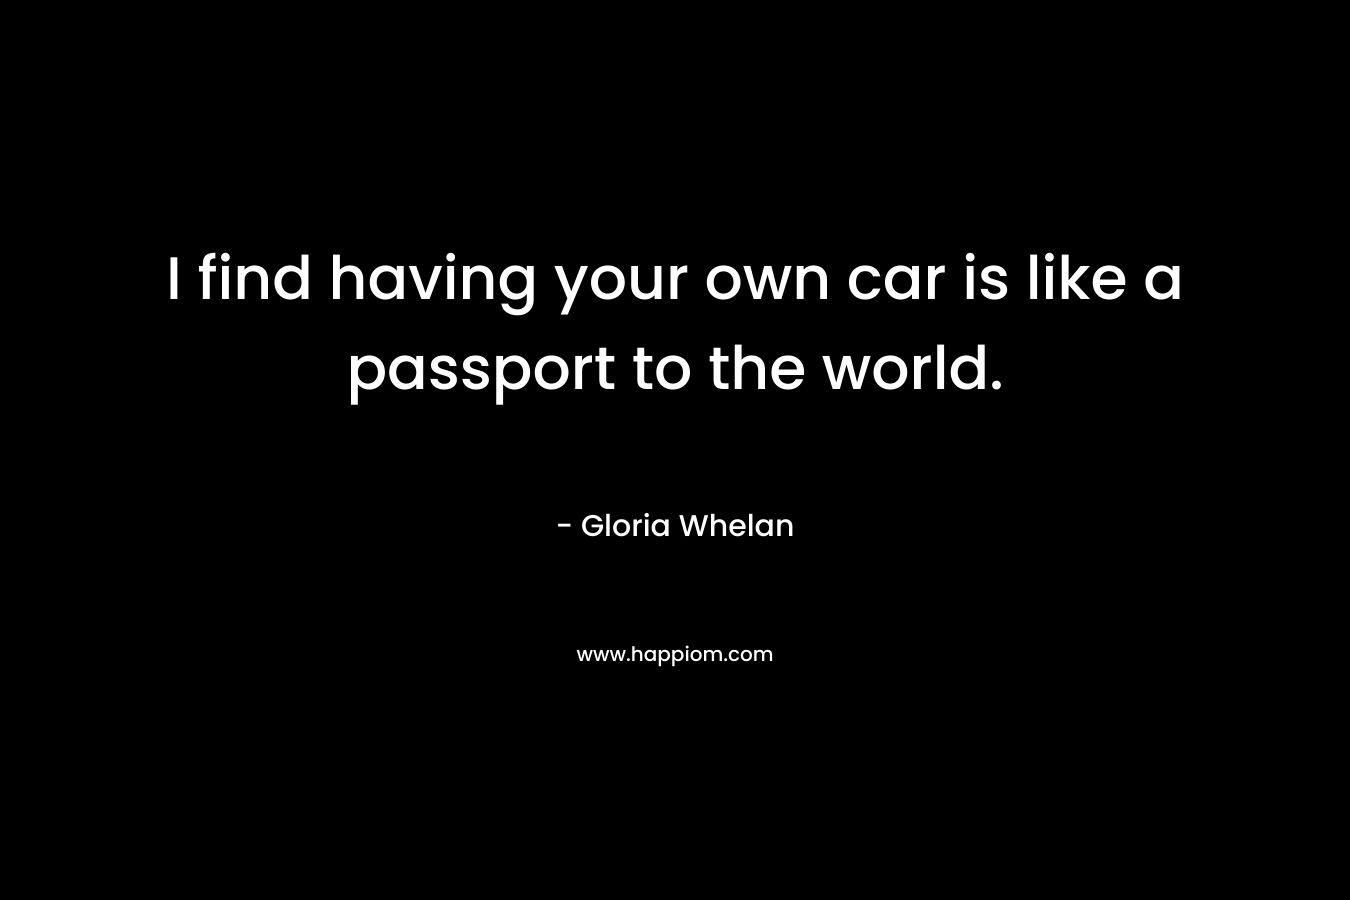 I find having your own car is like a passport to the world.